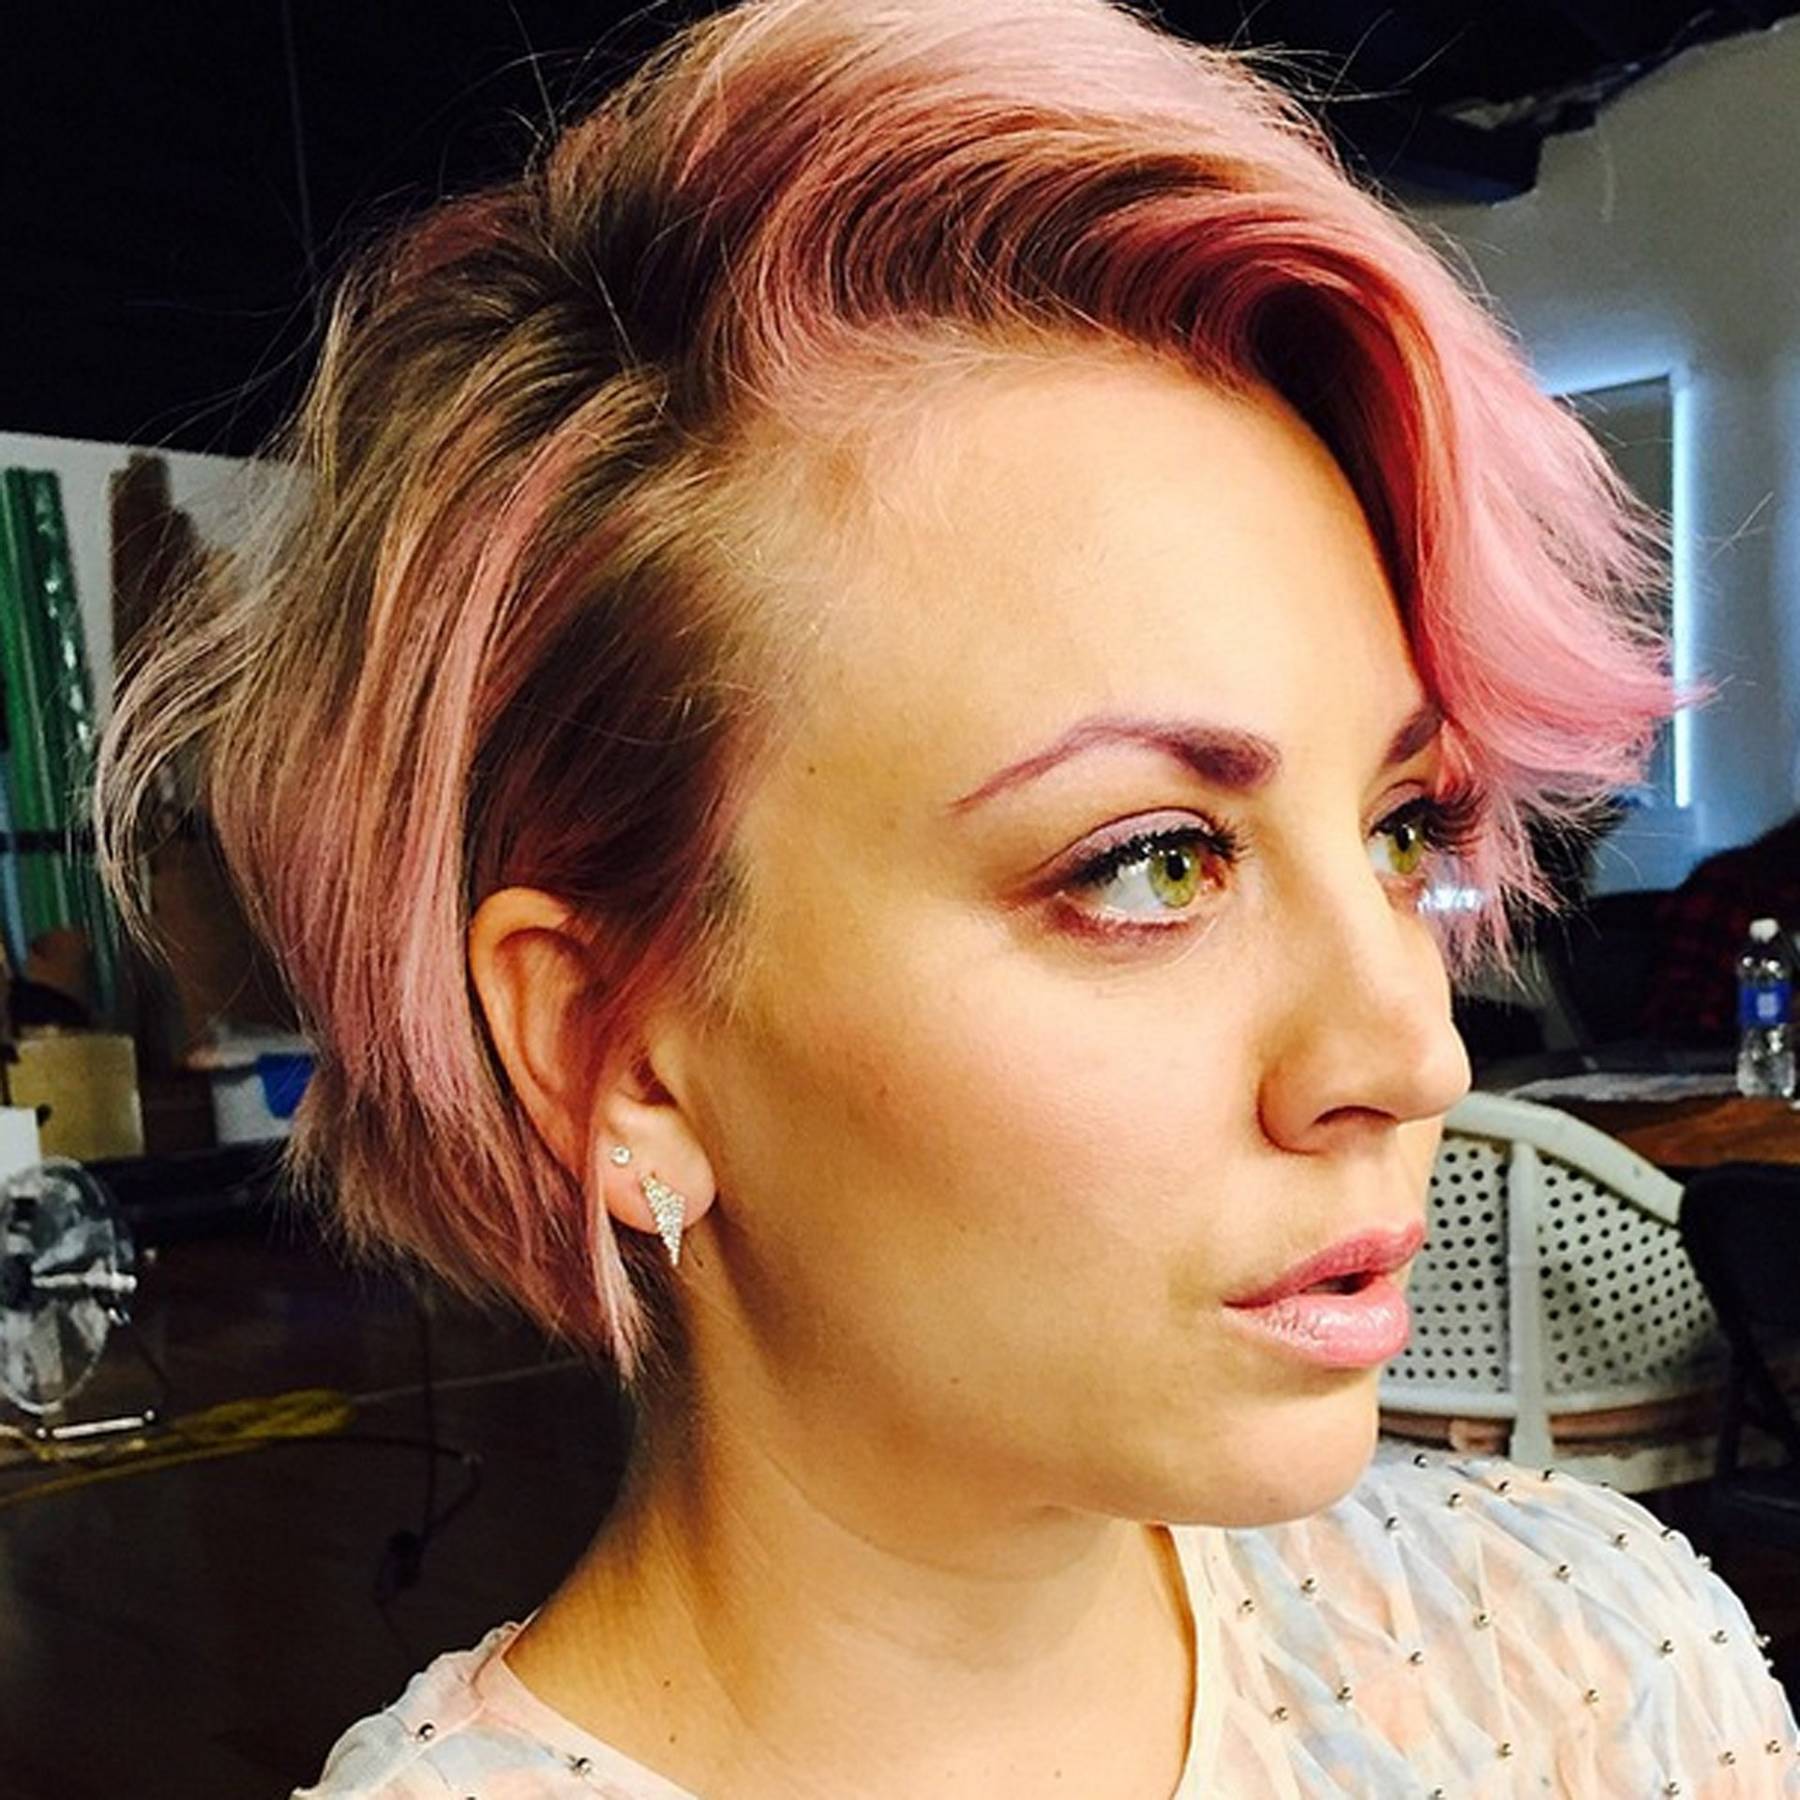 Kaley Cuoco Short Hair Bpatello See pictures of kaley cuoco with different hairstyles, including long hairstyles, medium hairstyles, short hairstyles, updos, and more. kaley cuoco short hair bpatello